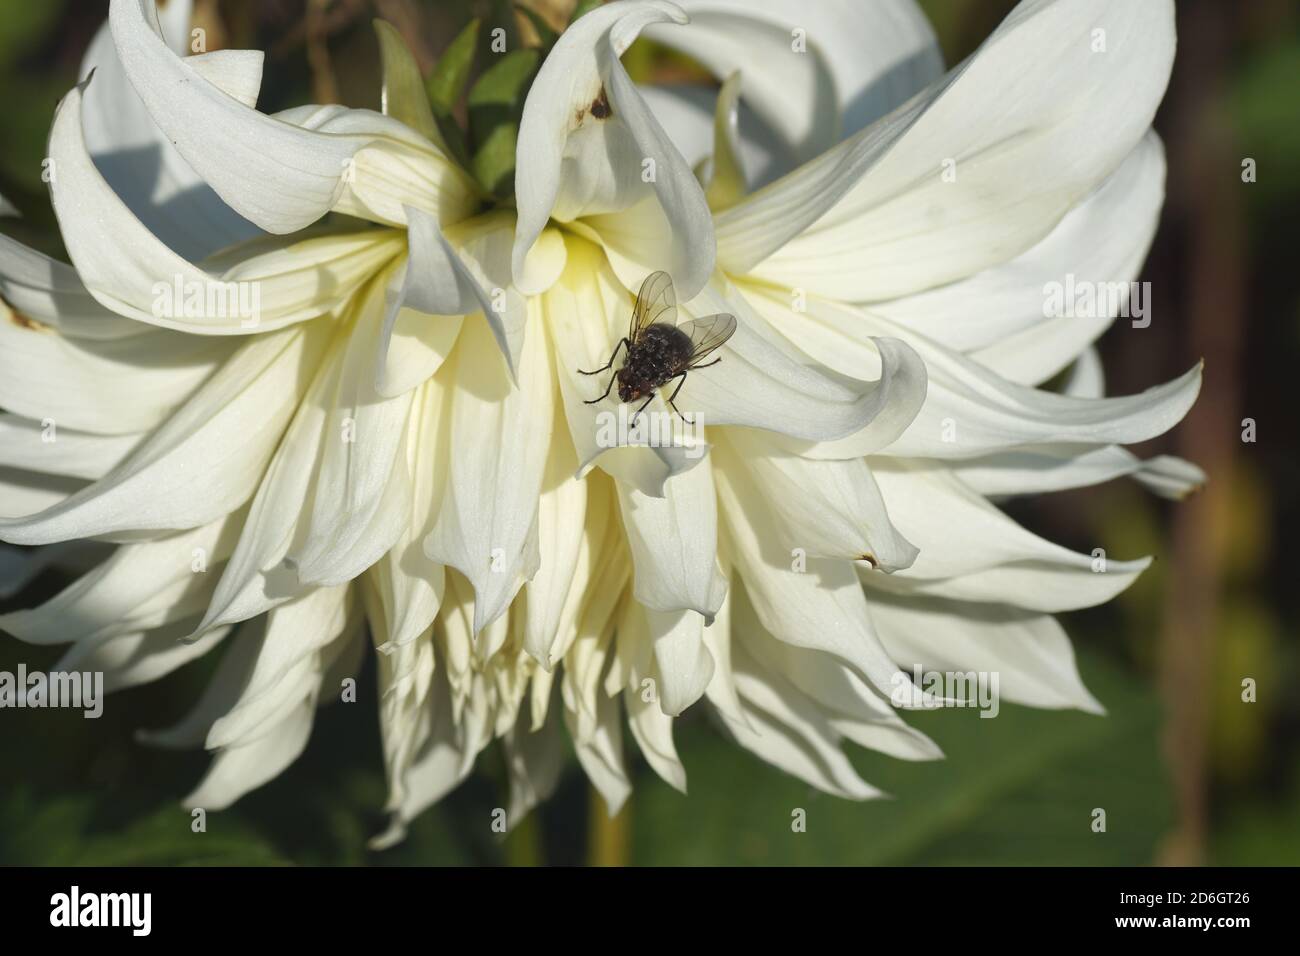 Single white dahlia bloom with a fly Polietes lardaria or Polietes meridionalis of the family House flies (Muscidae) in a Dutch garden in autumn. Stock Photo